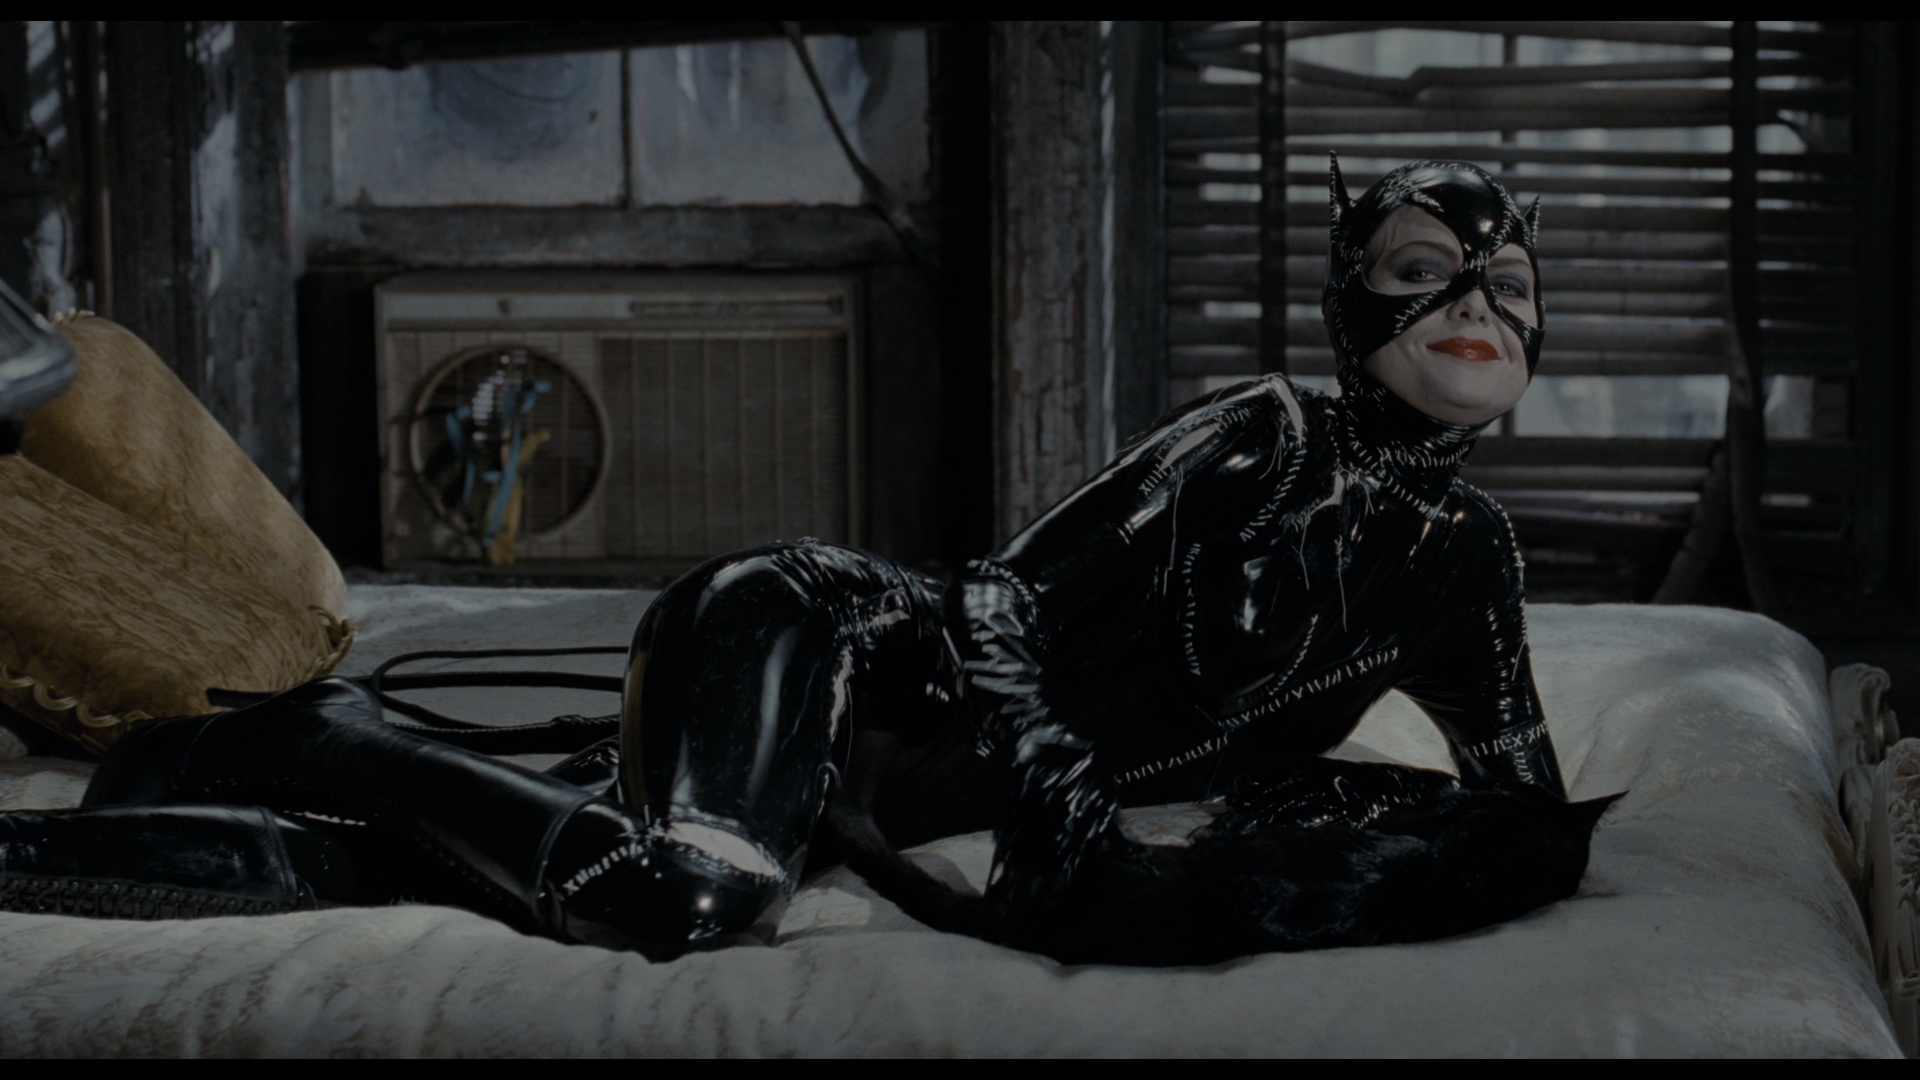 BATMAN RETURNS (1992) - Selina Kyle's (Michelle Pfeiffer) Catwoman Costume with Screen-Matched Corse - Image 30 of 35